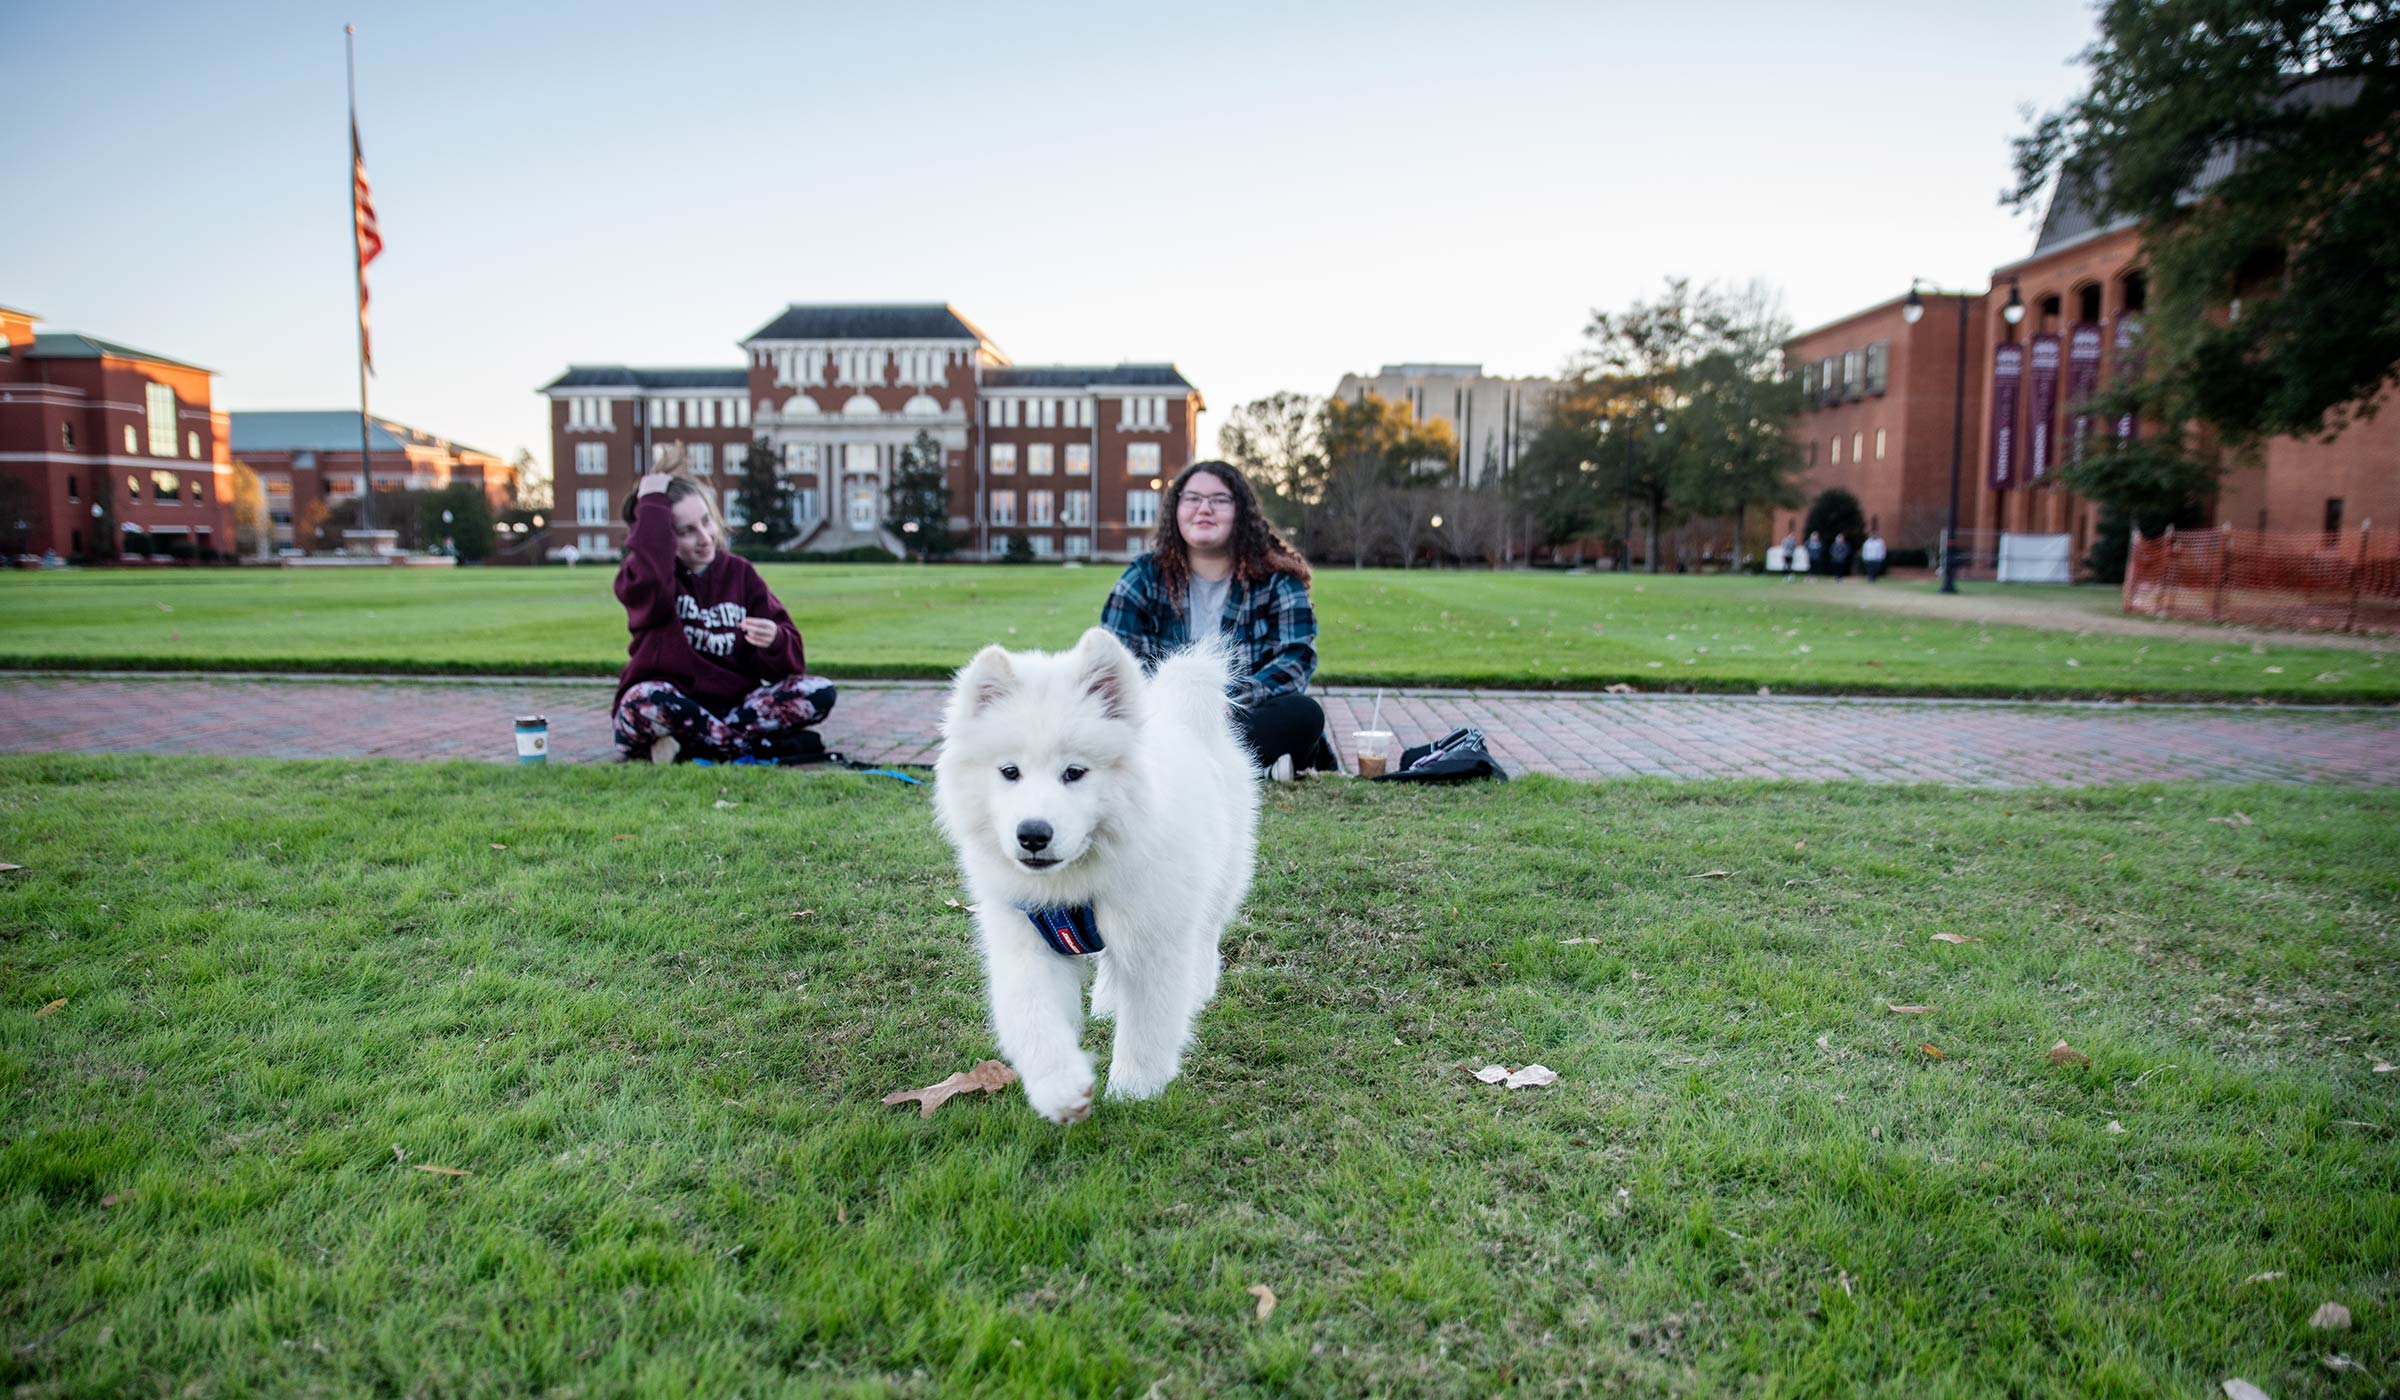 Two students sit on the Drill Field grass, playing with a fluffy white Samoyed puppy, with Swalm in the distance behind them.